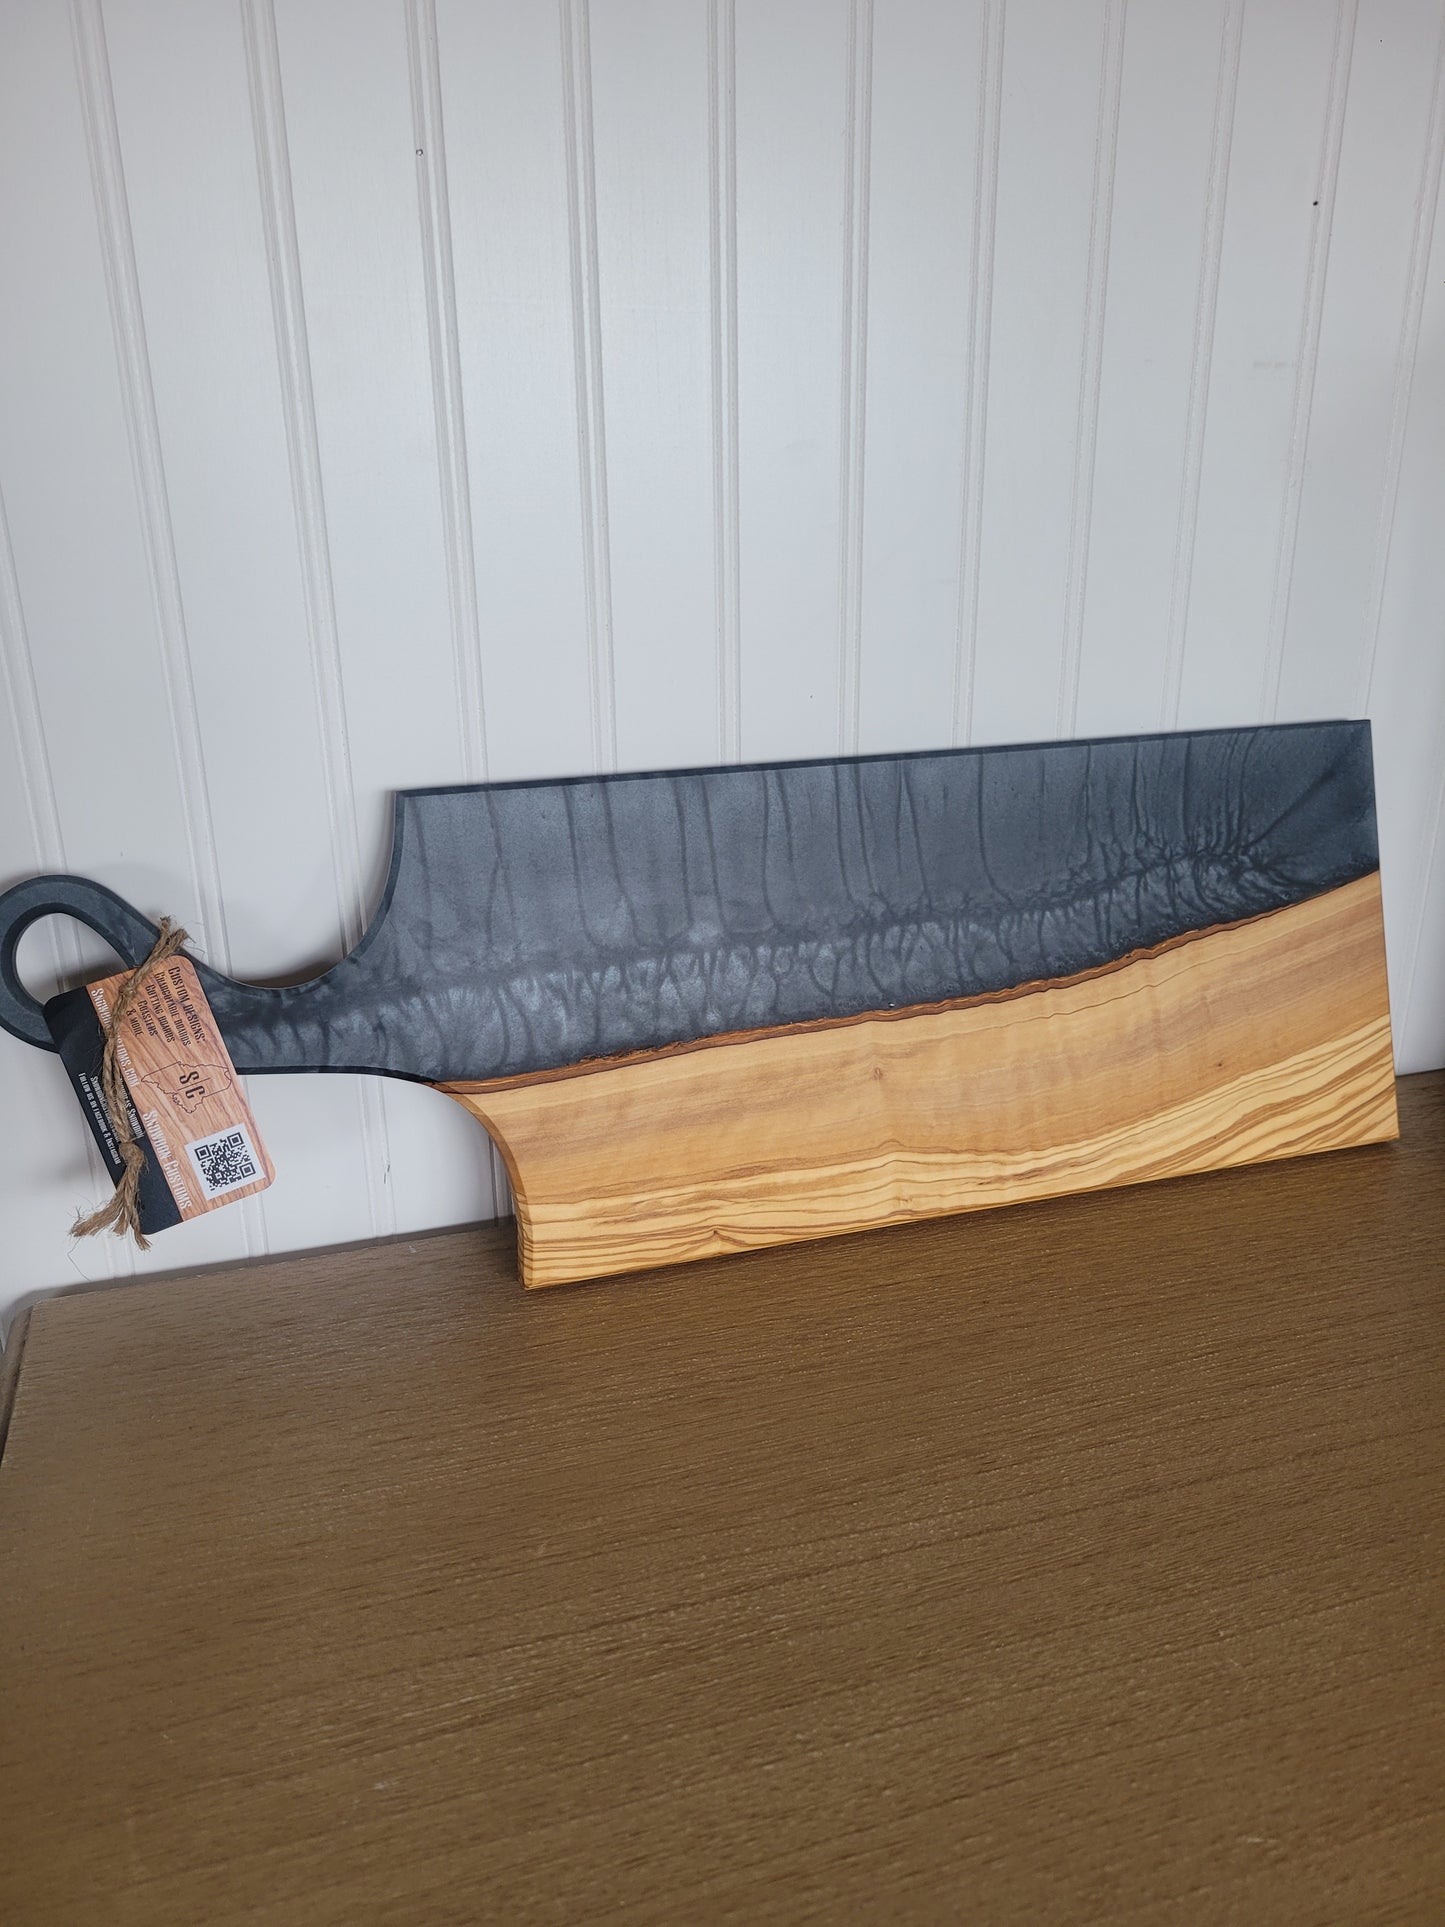 Resin and Wood Paddle Board